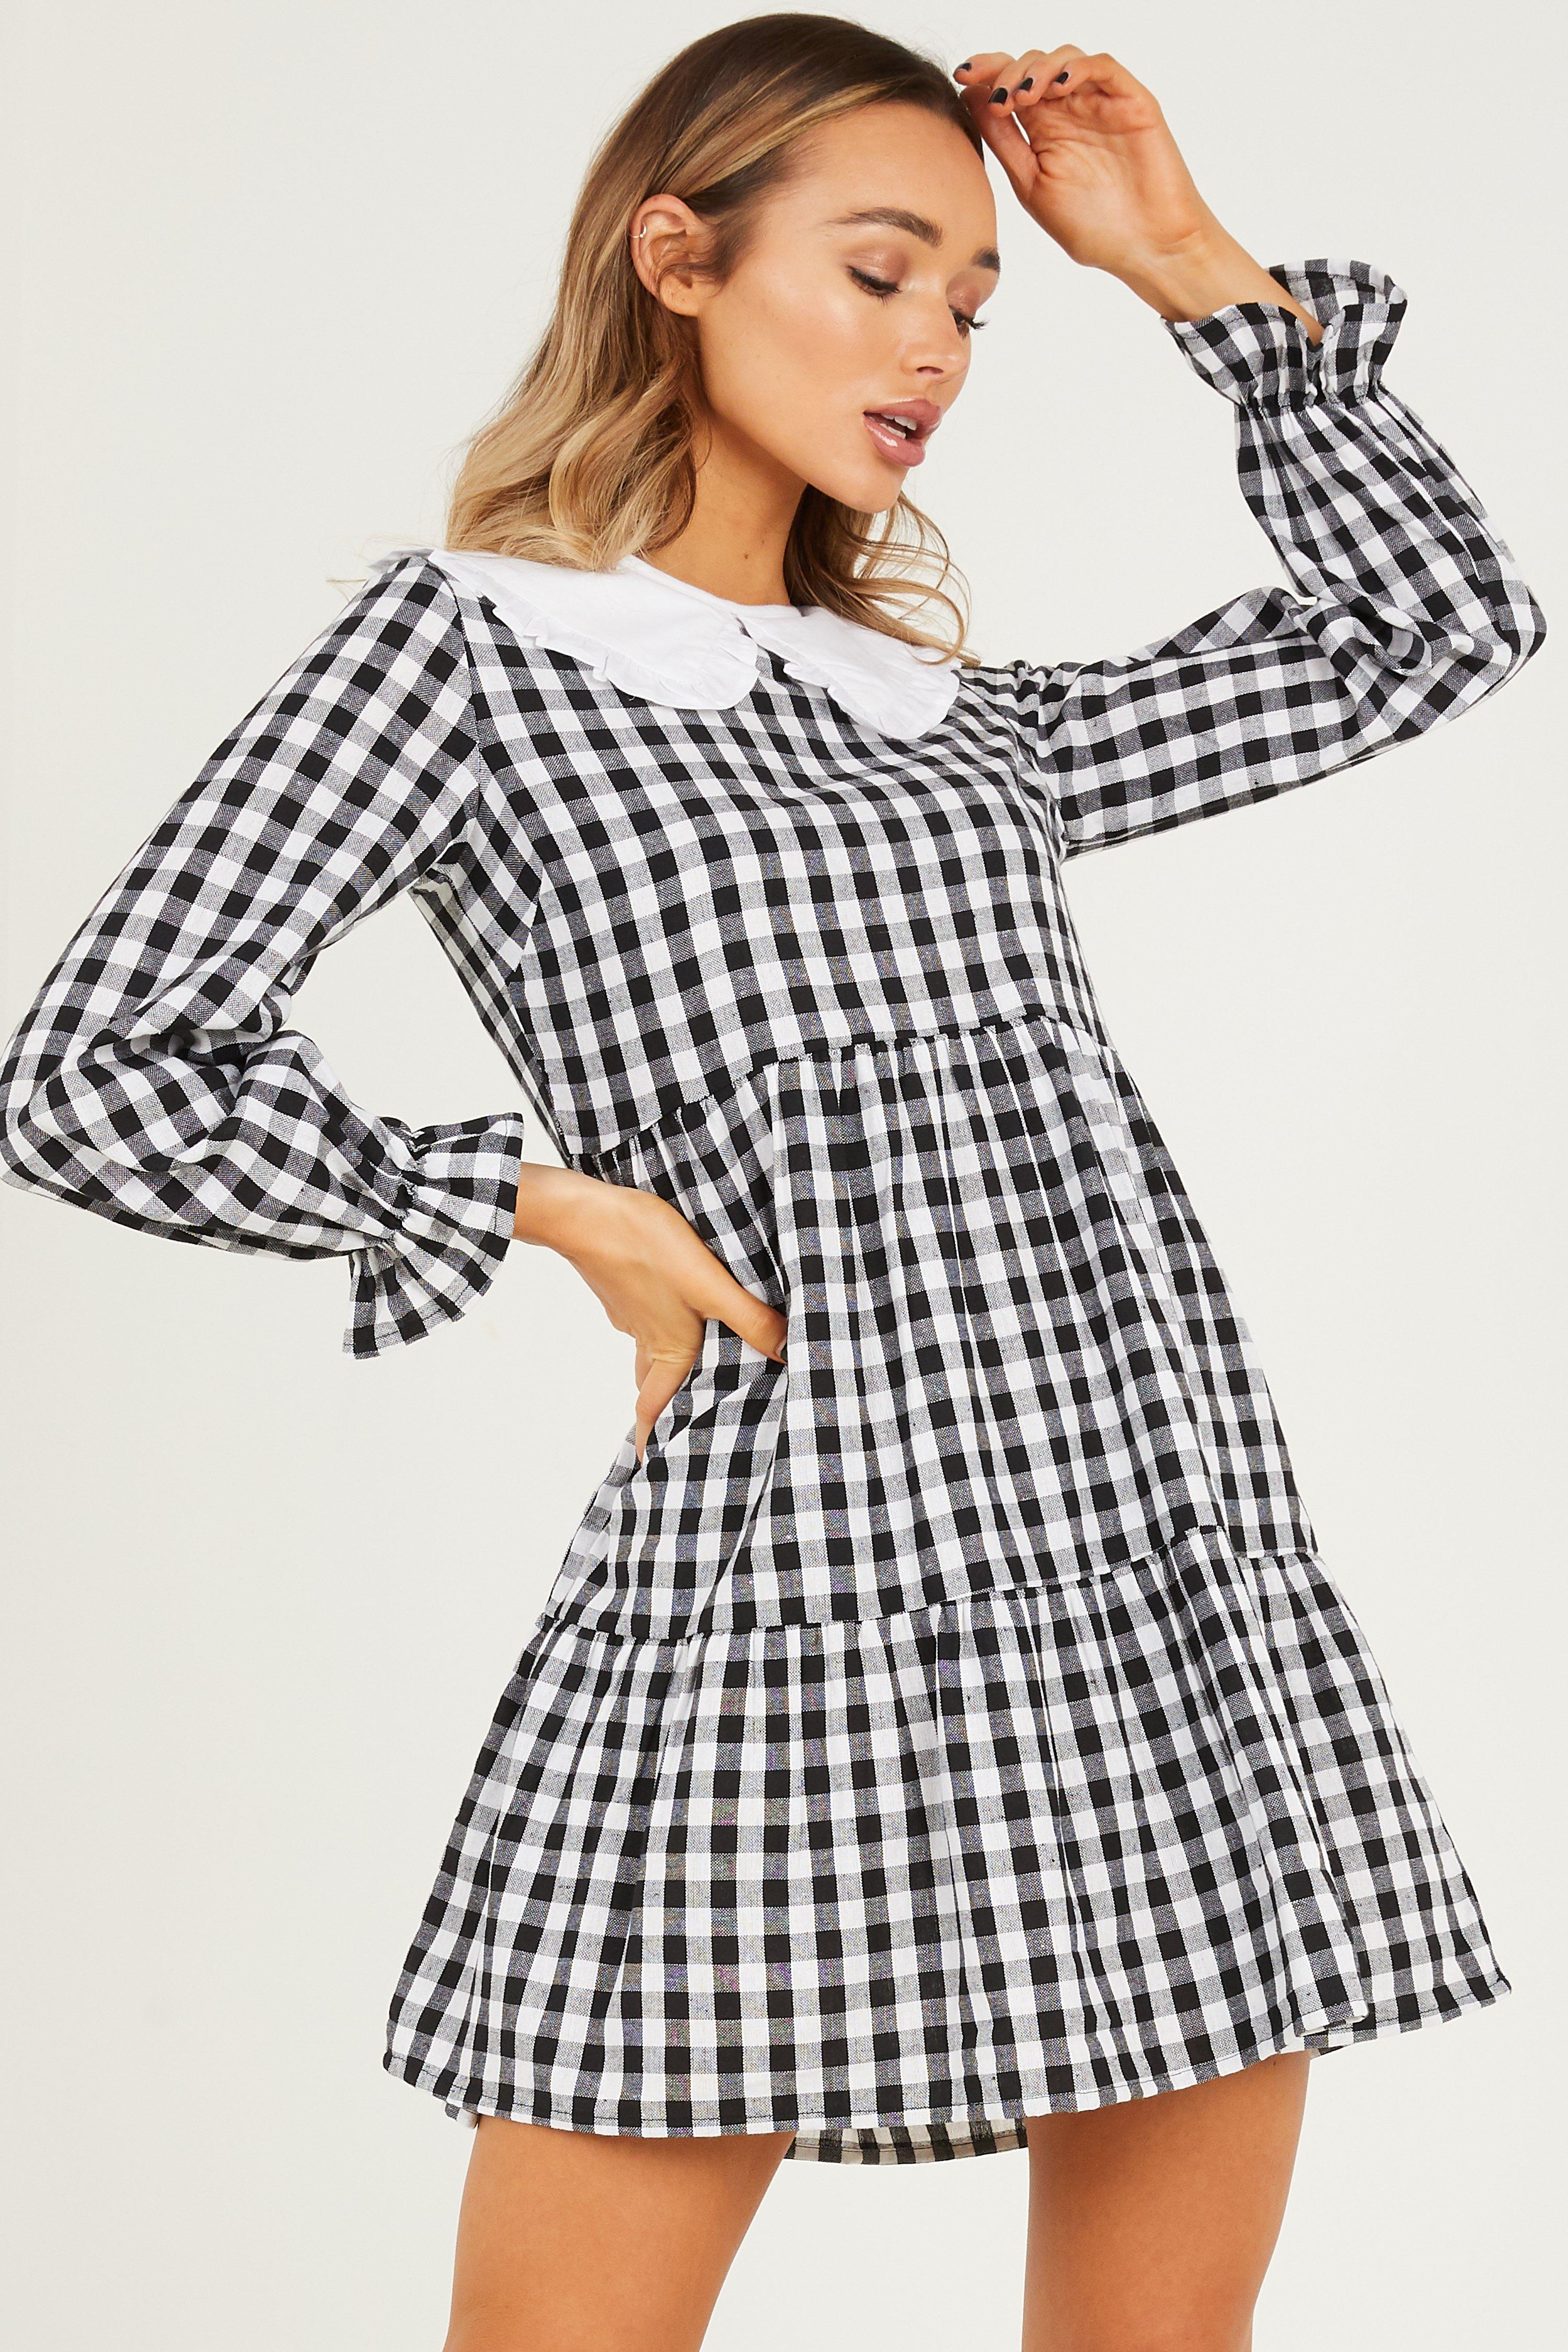 White Gingham Tiered Dress - Quiz Clothing